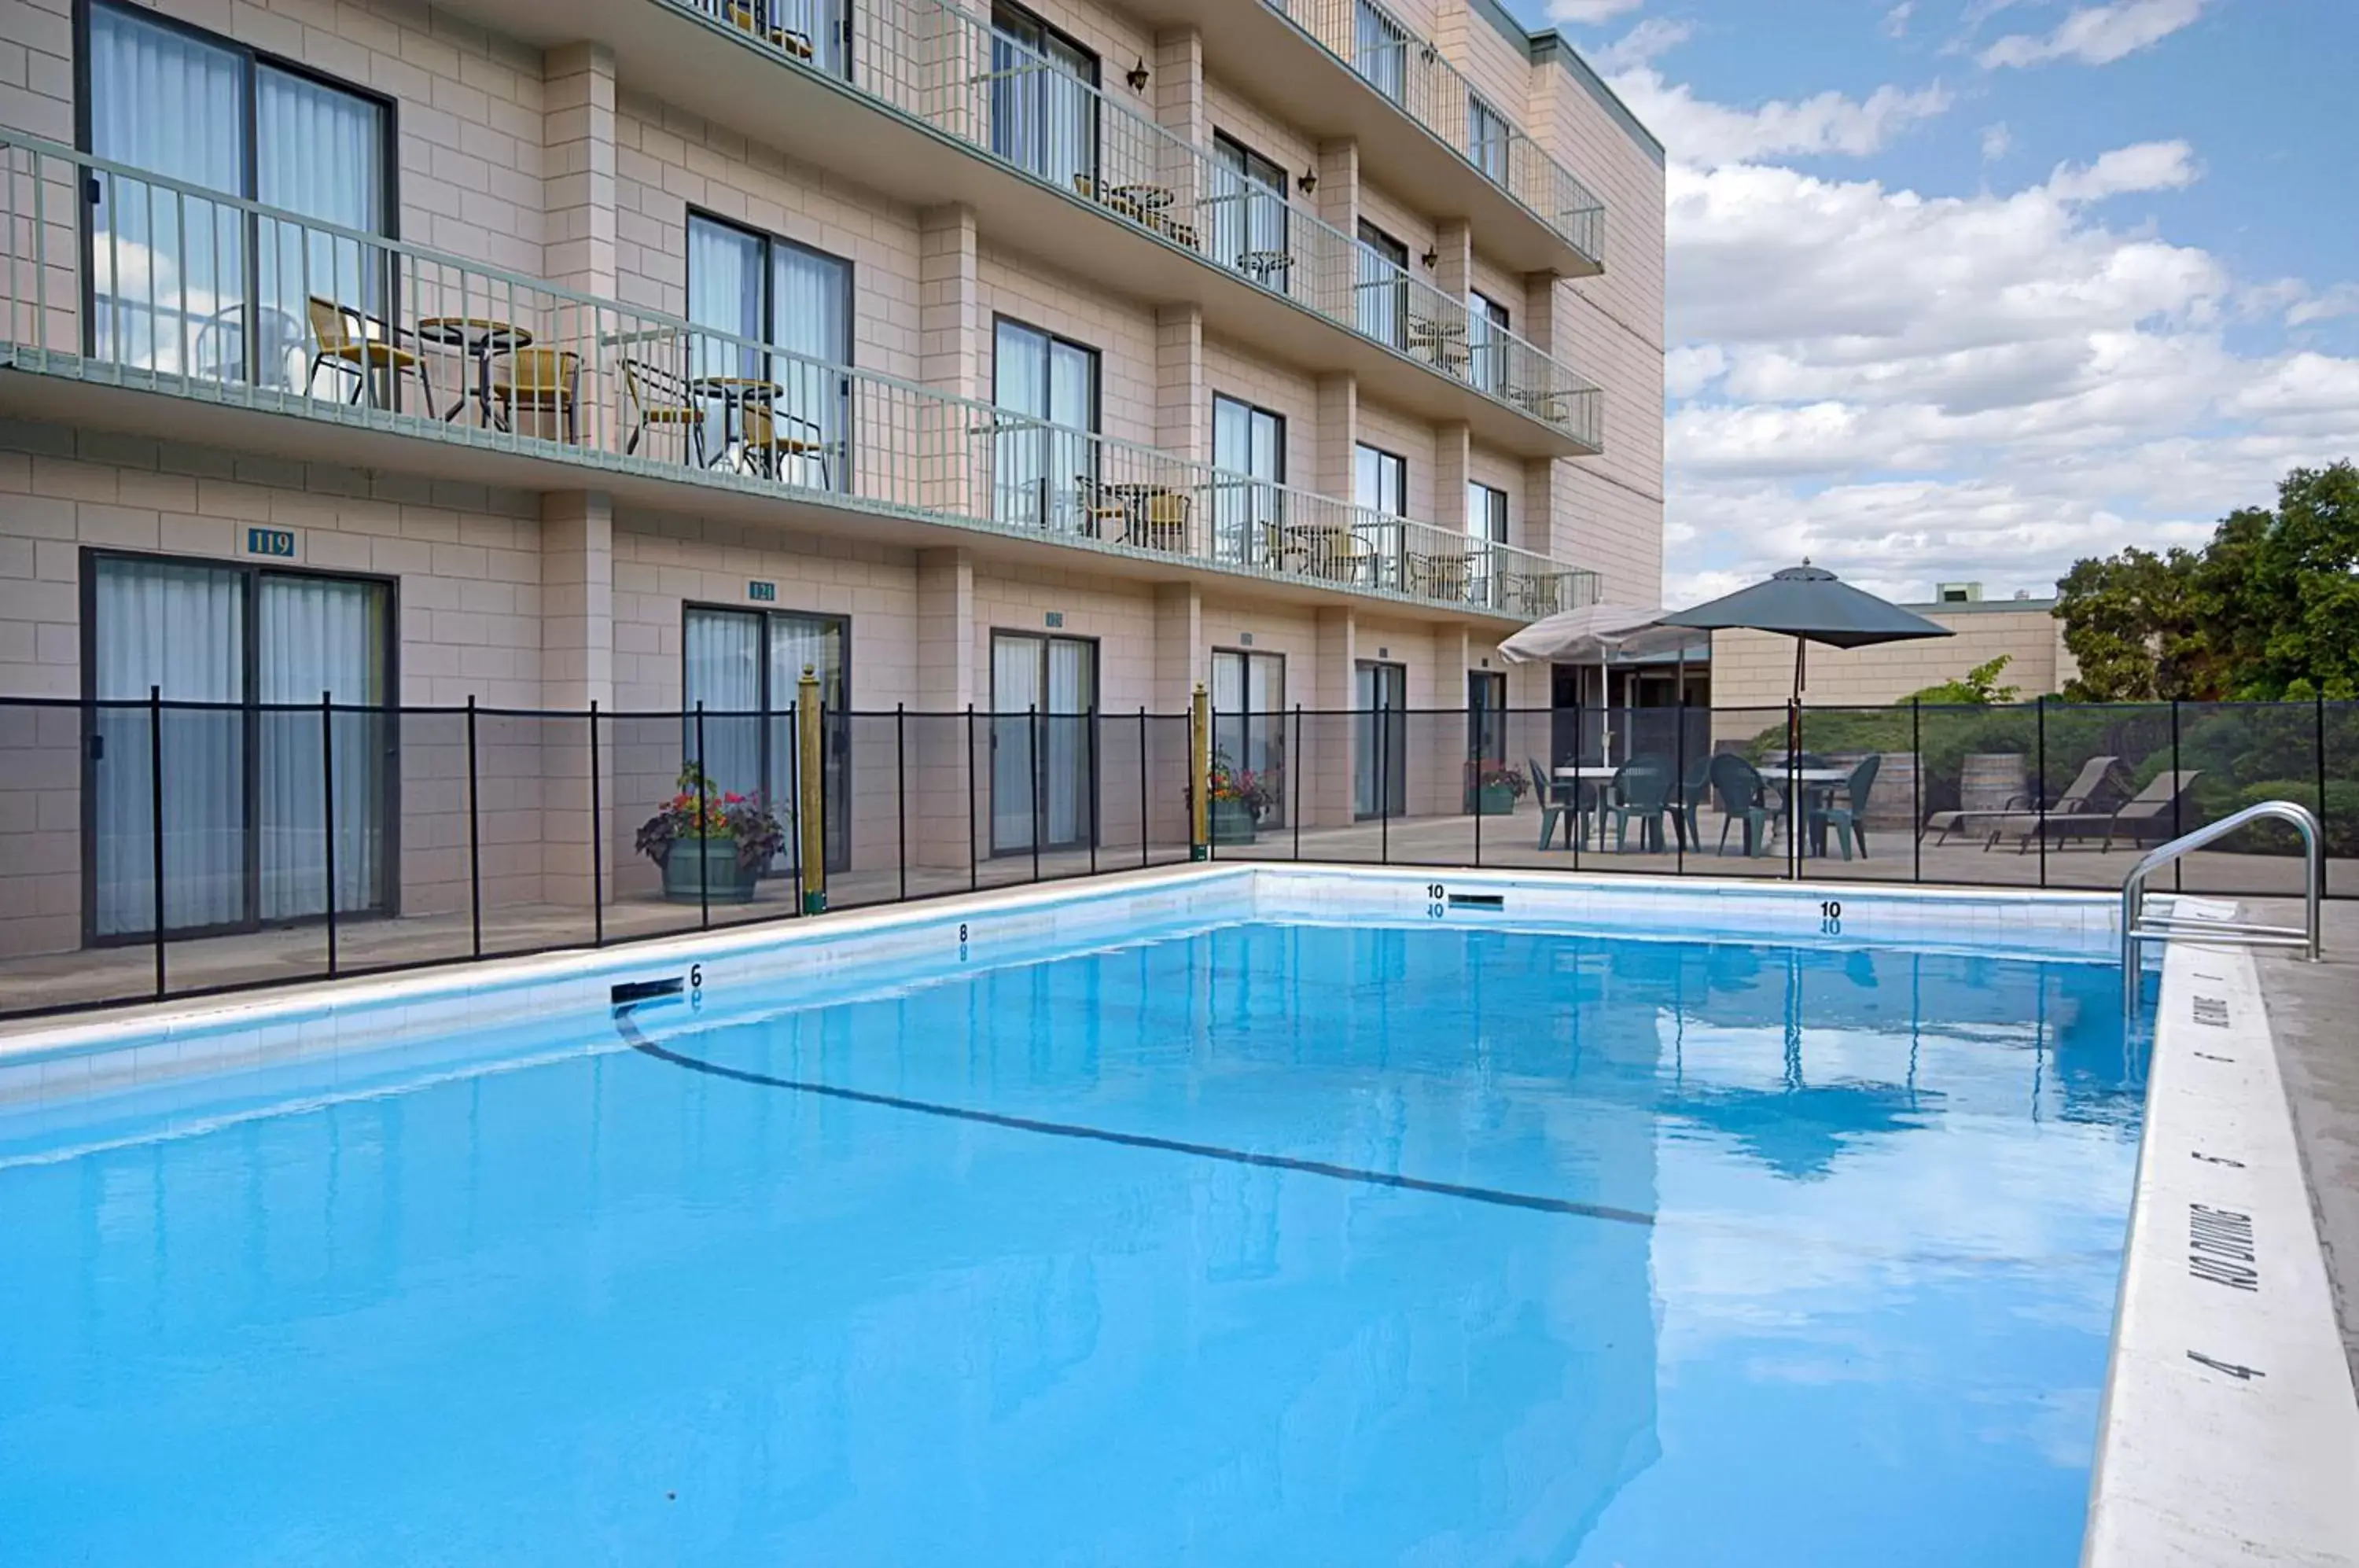 Swimming Pool in Days Inn by Wyndham Cranbrook Conference Centre